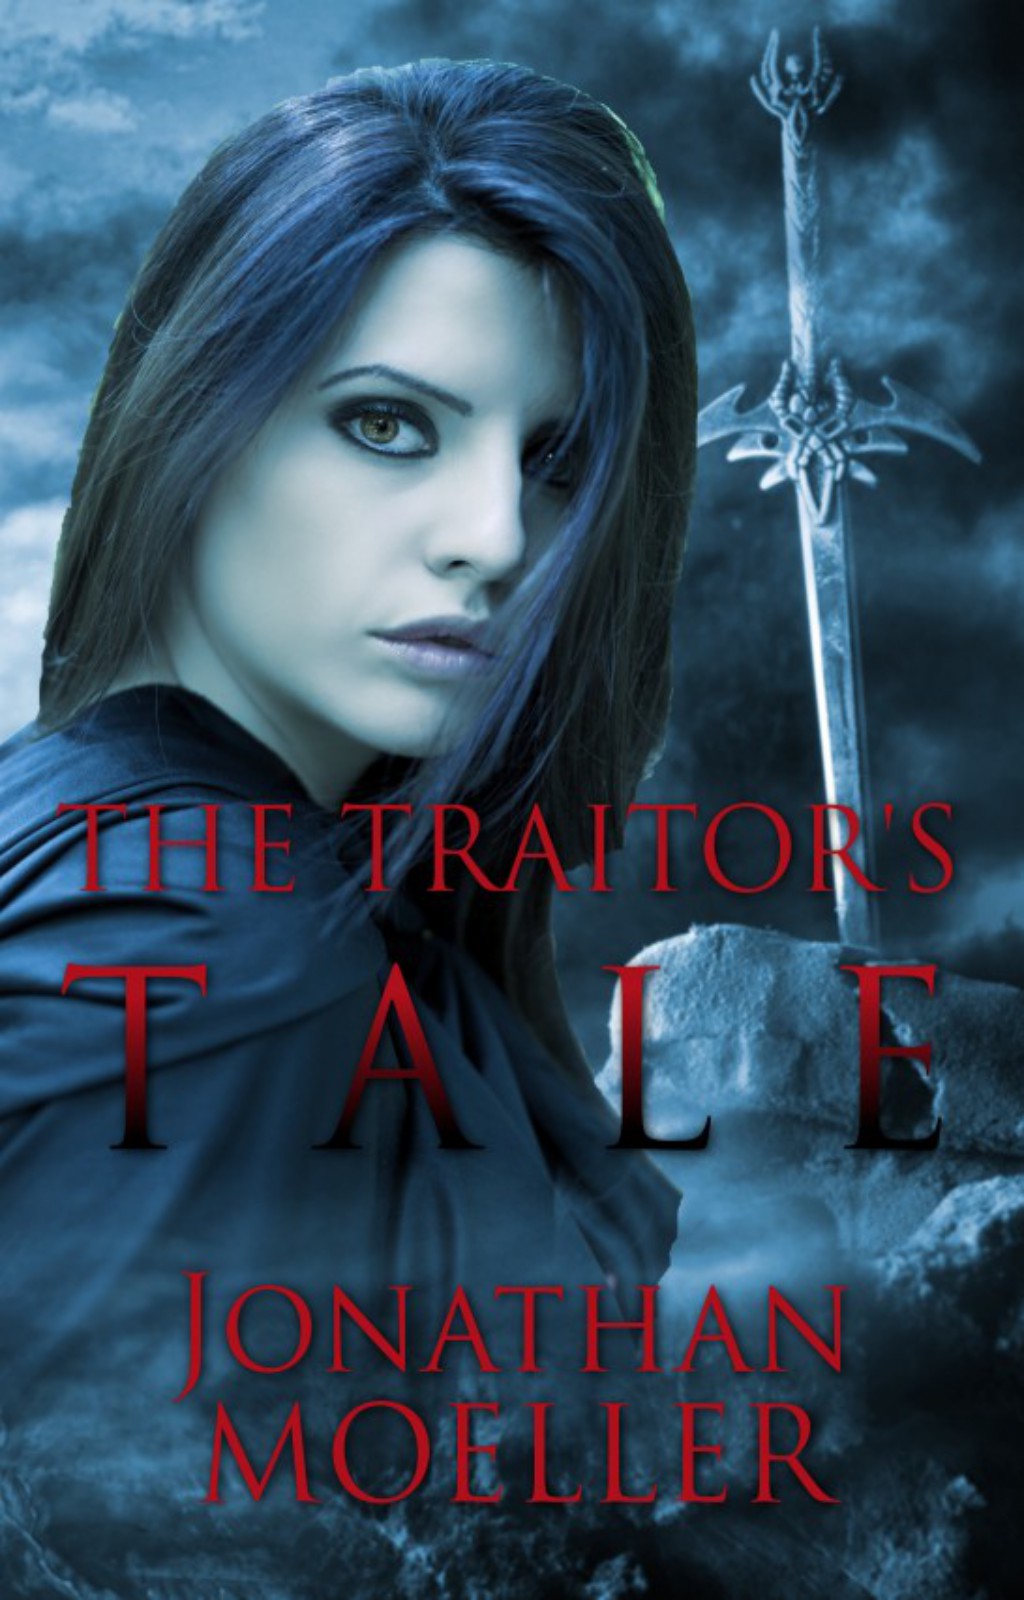 The Traitor's Tale by Jonathan Moeller